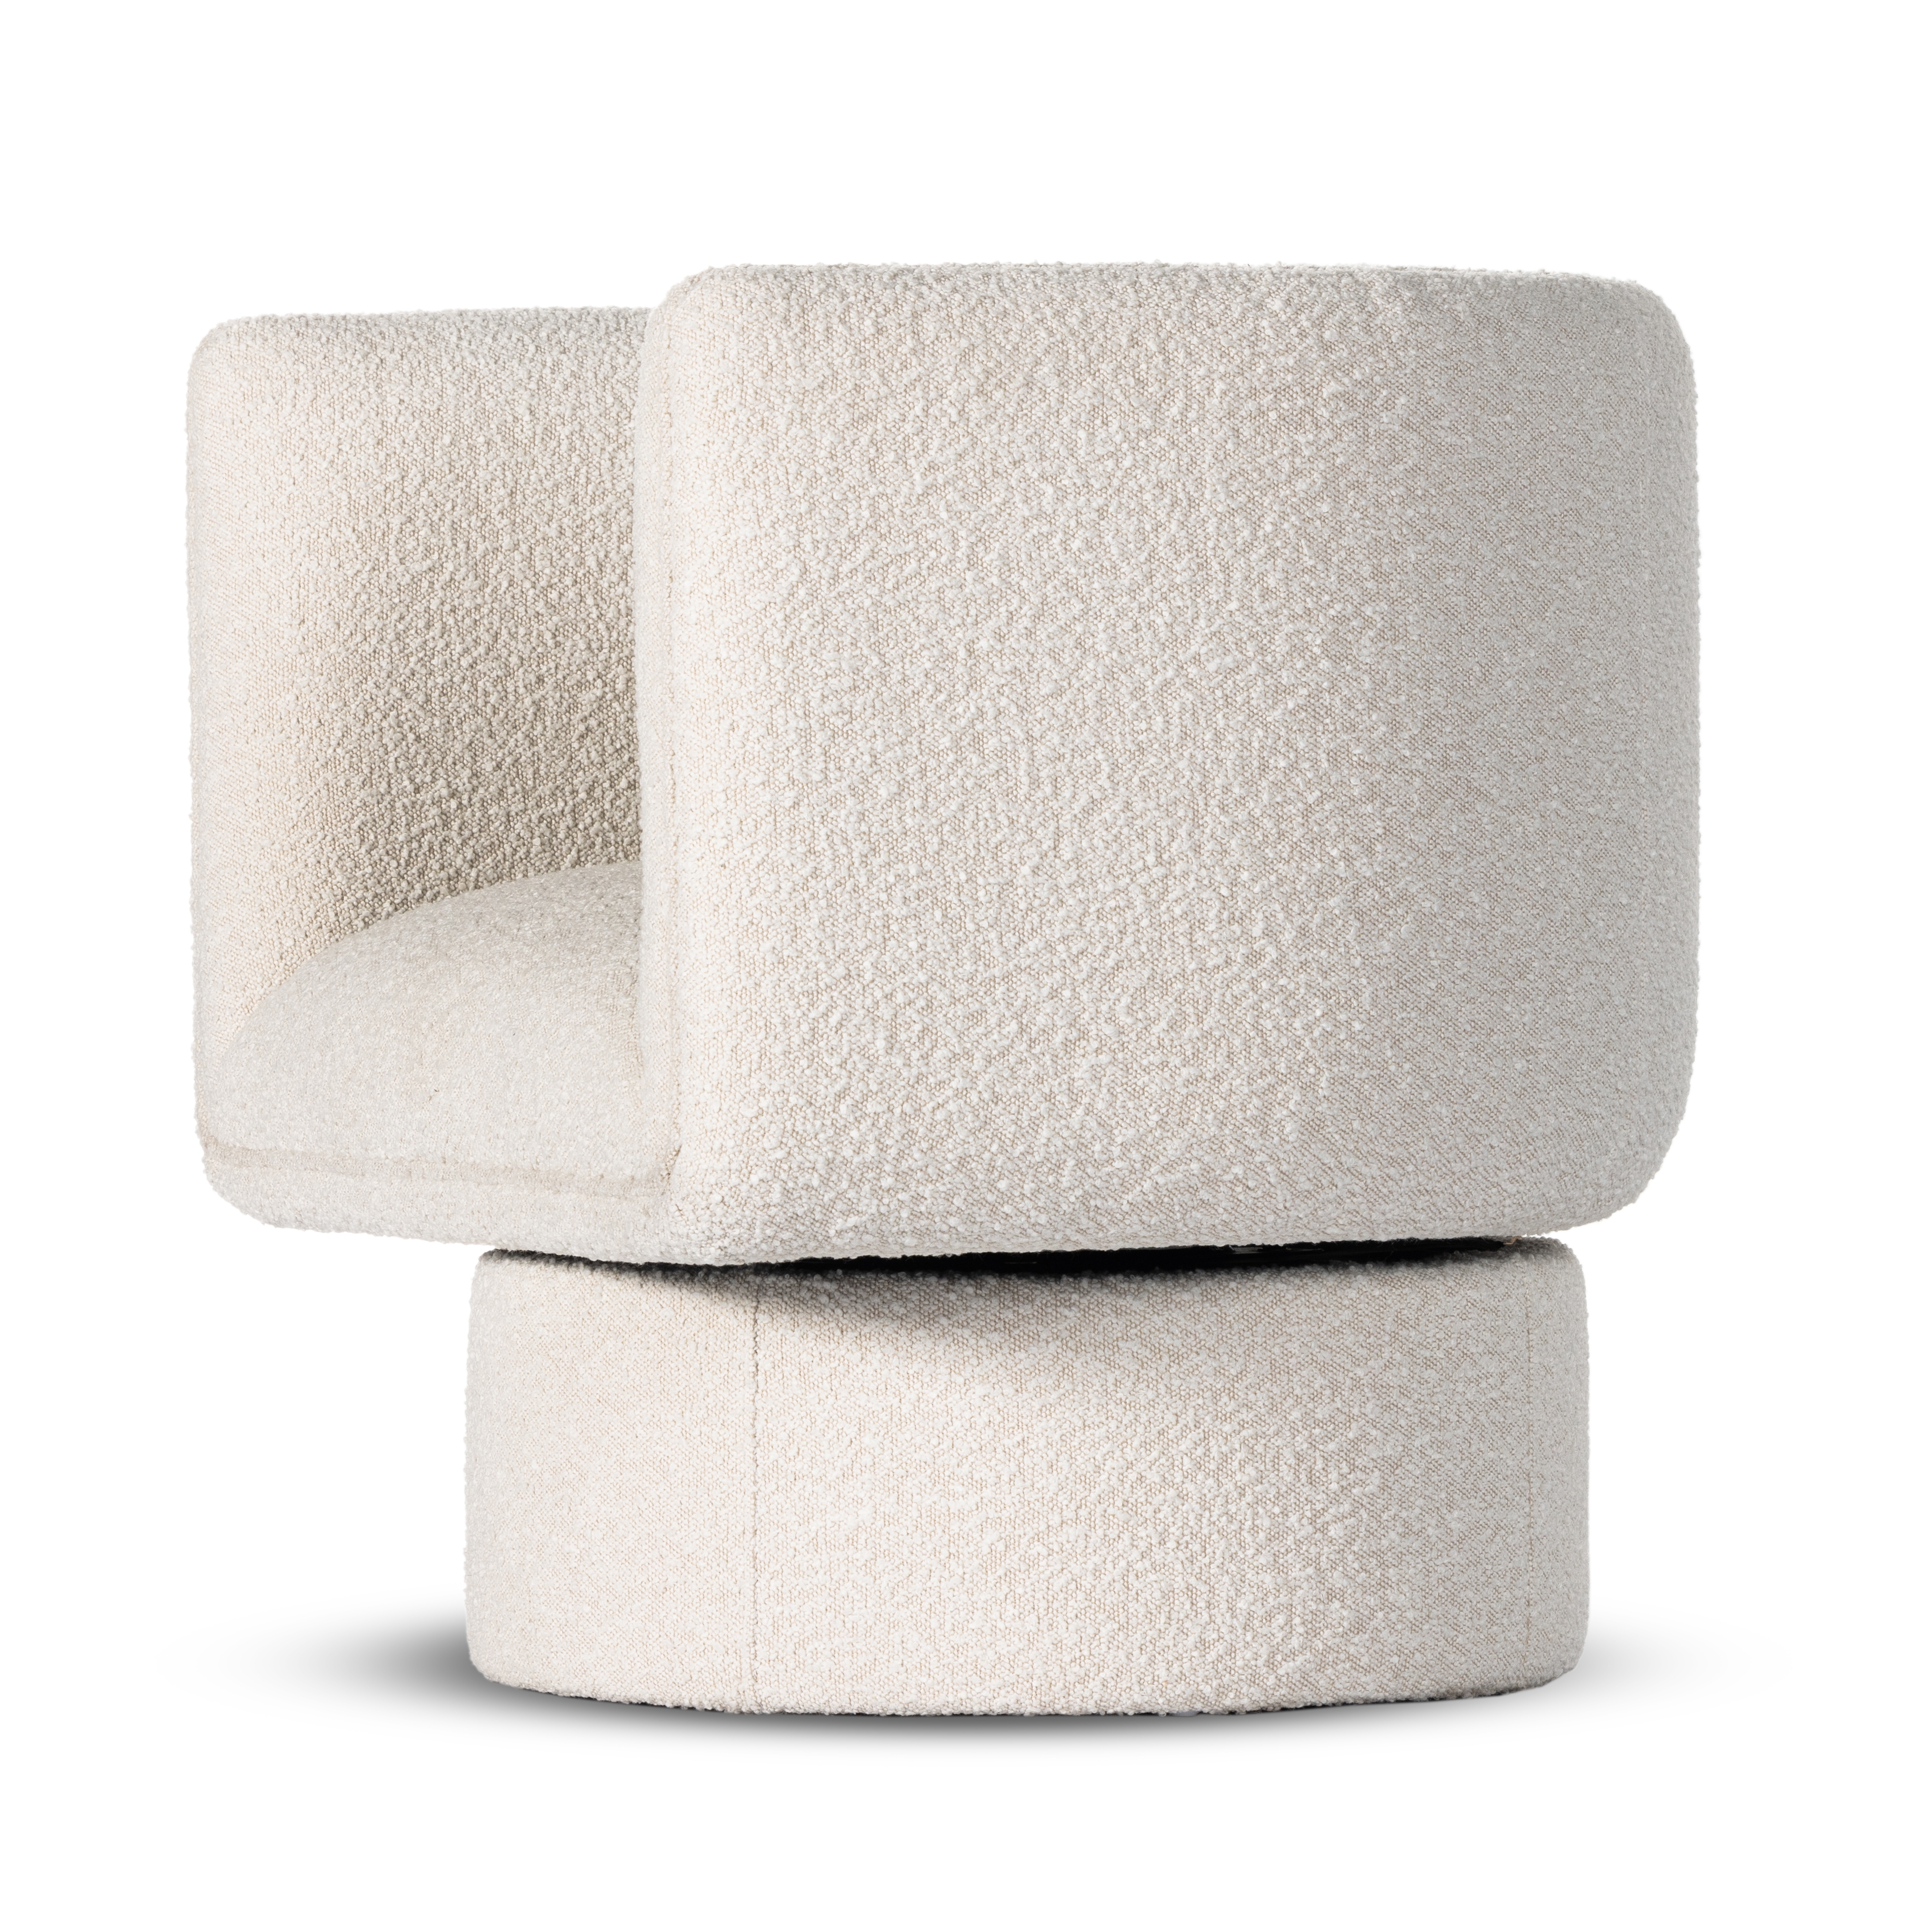 Adriel Swivel Chair-Knoll Natural - Image 2